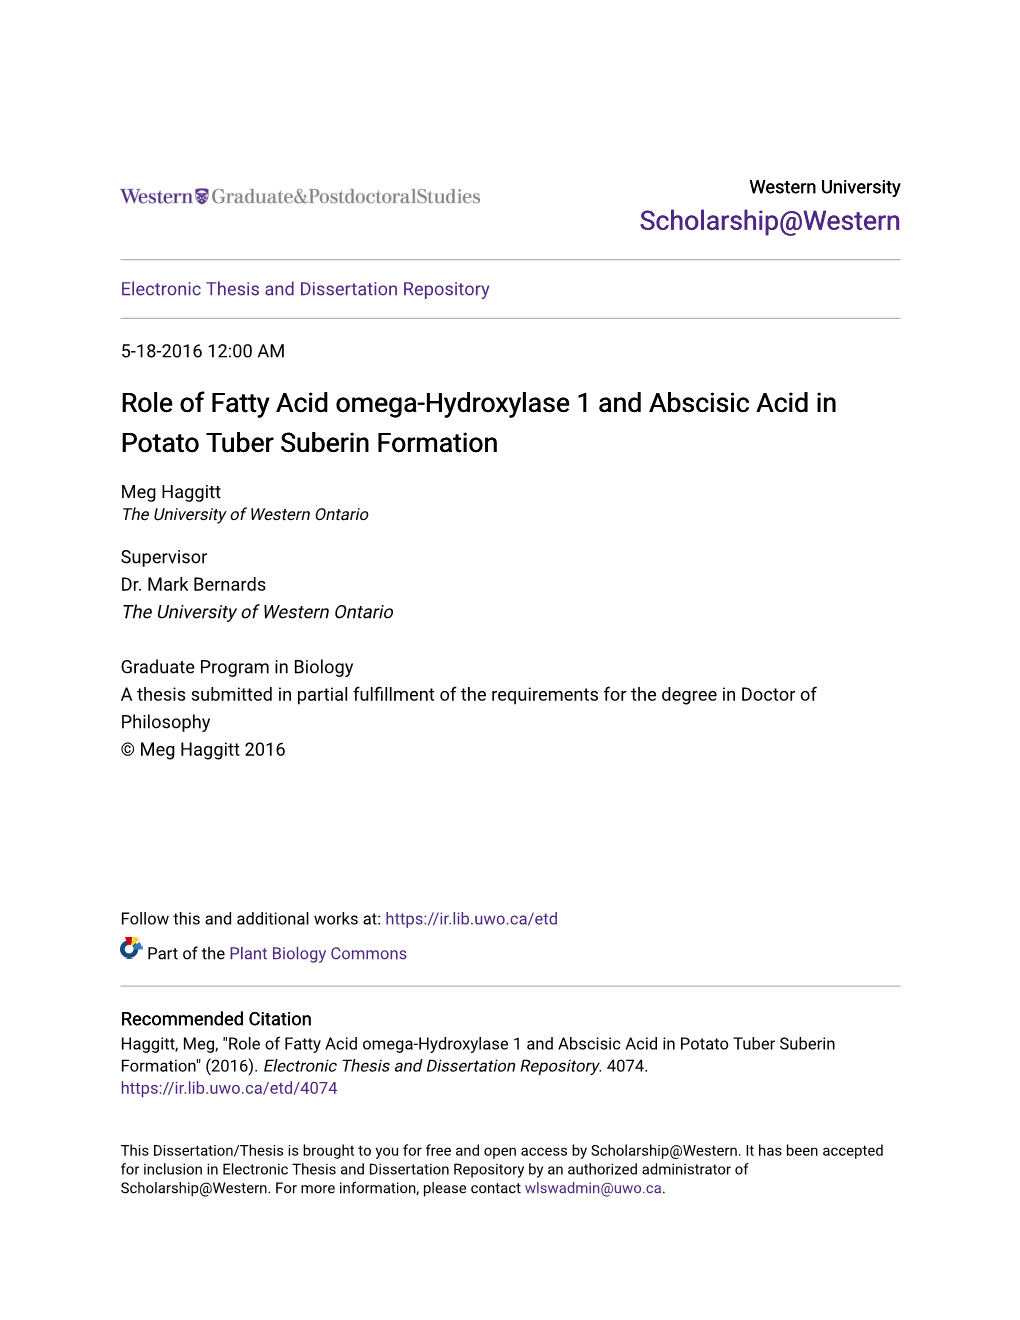 Role of Fatty Acid Omega-Hydroxylase 1 and Abscisic Acid in Potato Tuber Suberin Formation